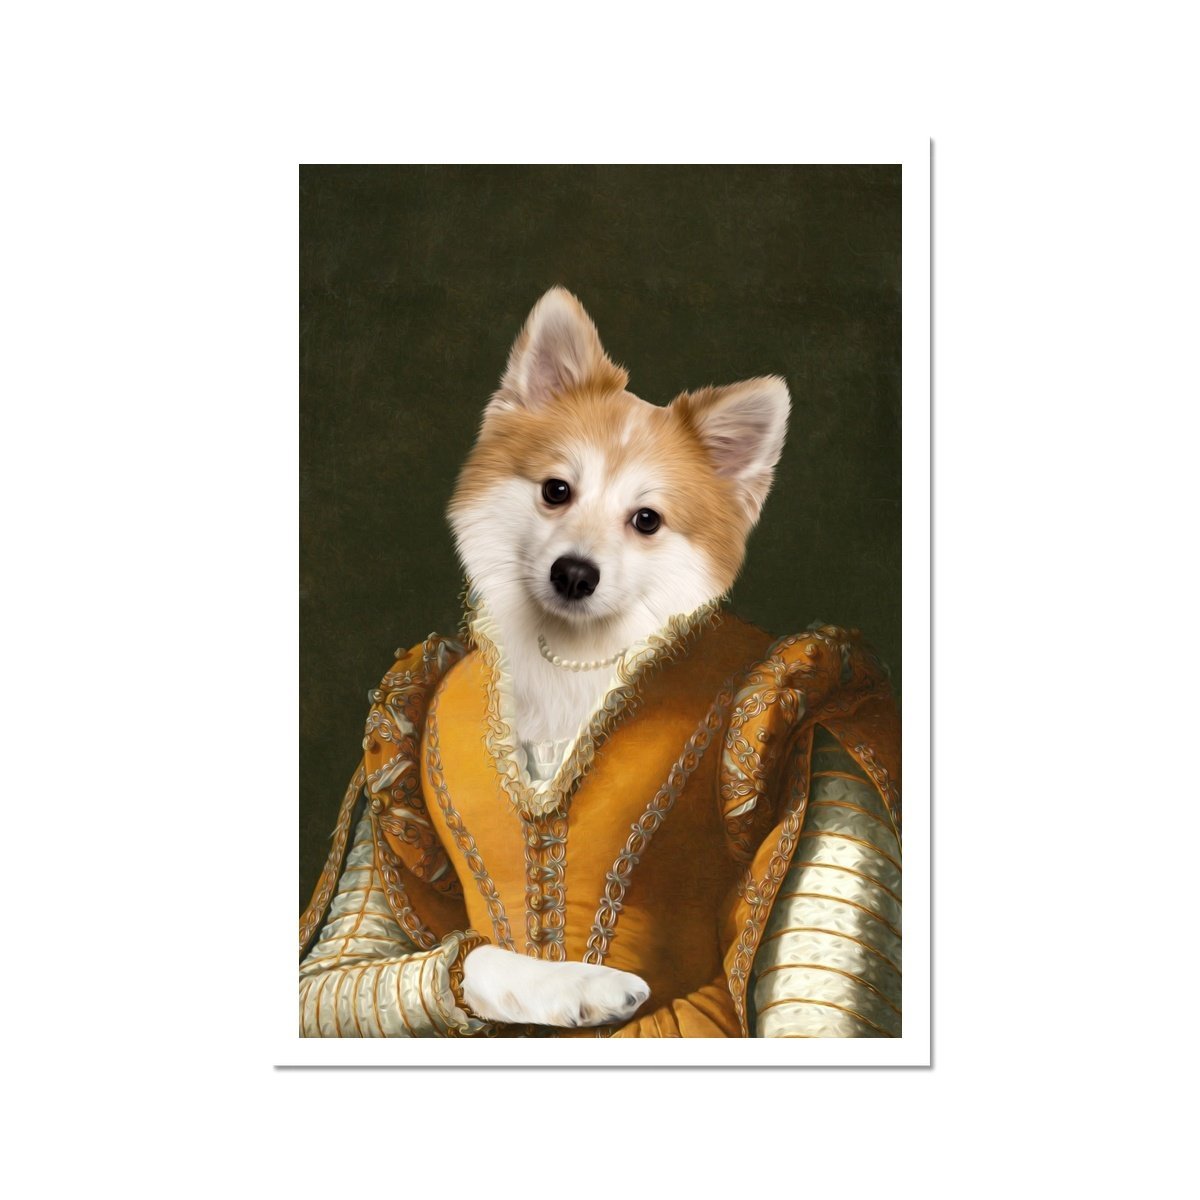 The Classy Lady: Custom Pet Poster - Paw & Glory - #pet portraits# - #dog portraits# - #pet portraits uk#Paw & Glory, paw and glory, dog renaissance paintings stained glass pet portraits pet painting gift best pet canvas art online pet portraits watercolour dog portraits pet portraits